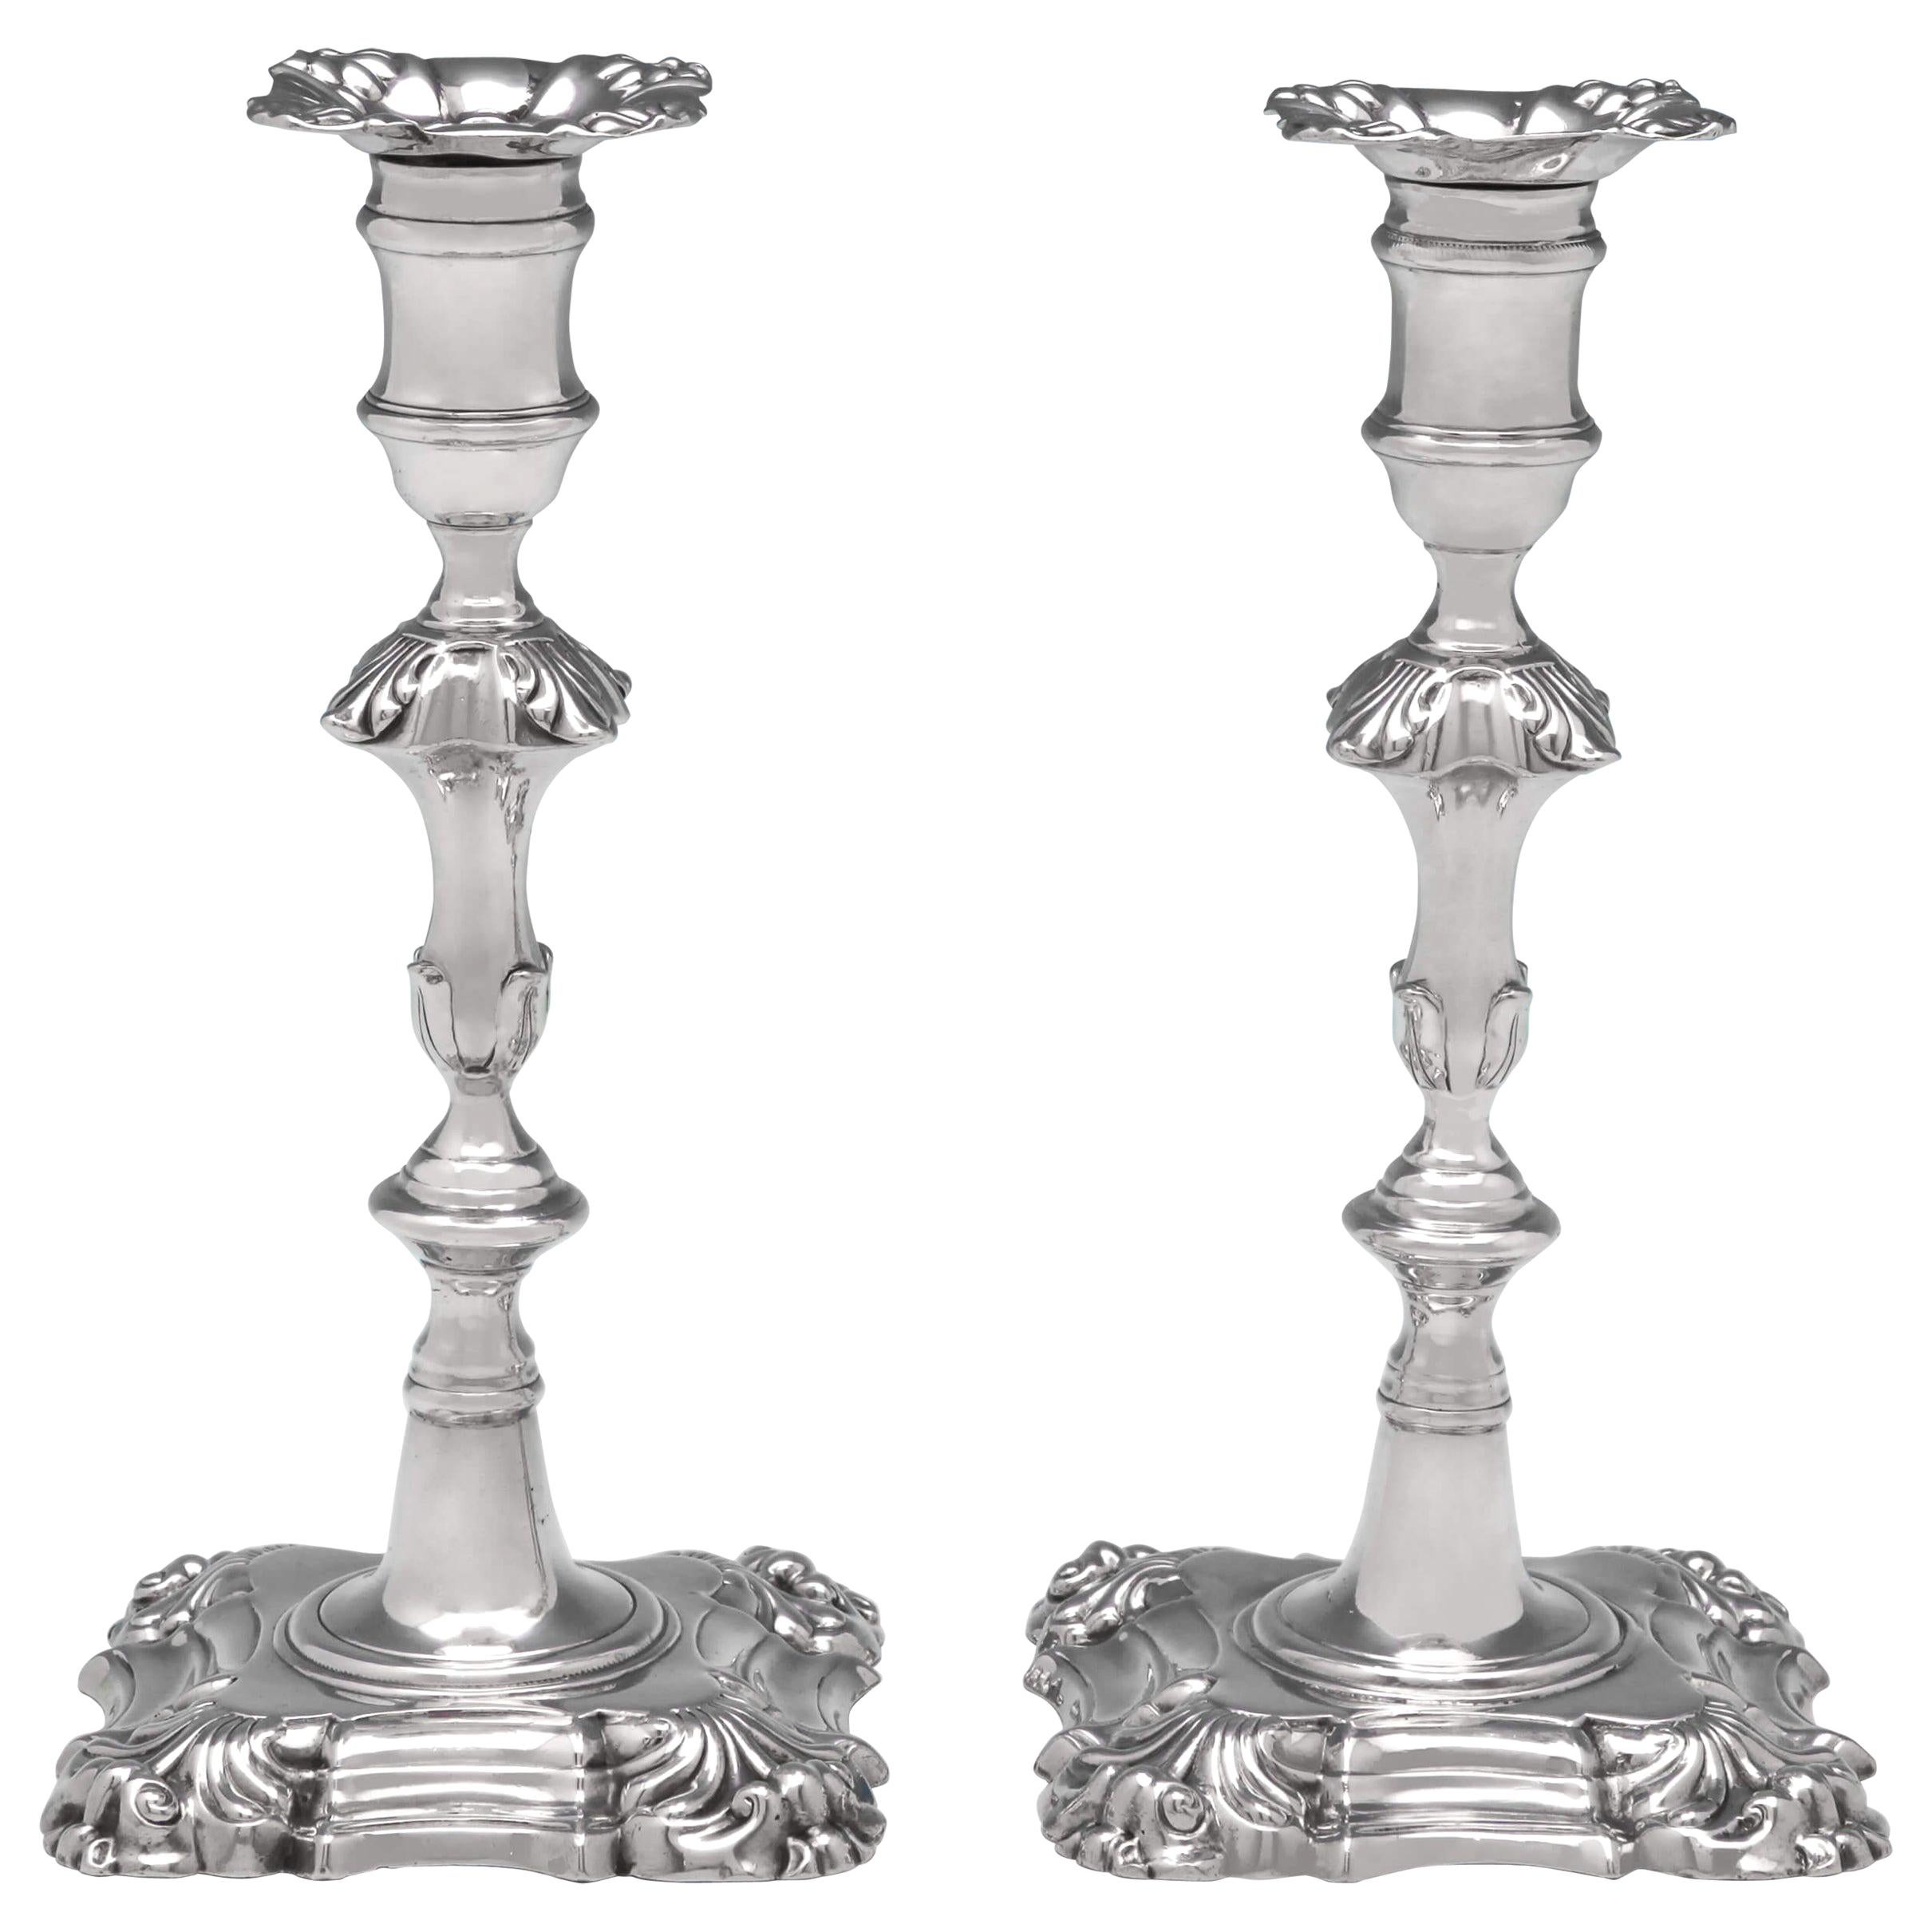 'Four Shell' Antique Sterling Silver Pair of Cast Candlesticks from 1870